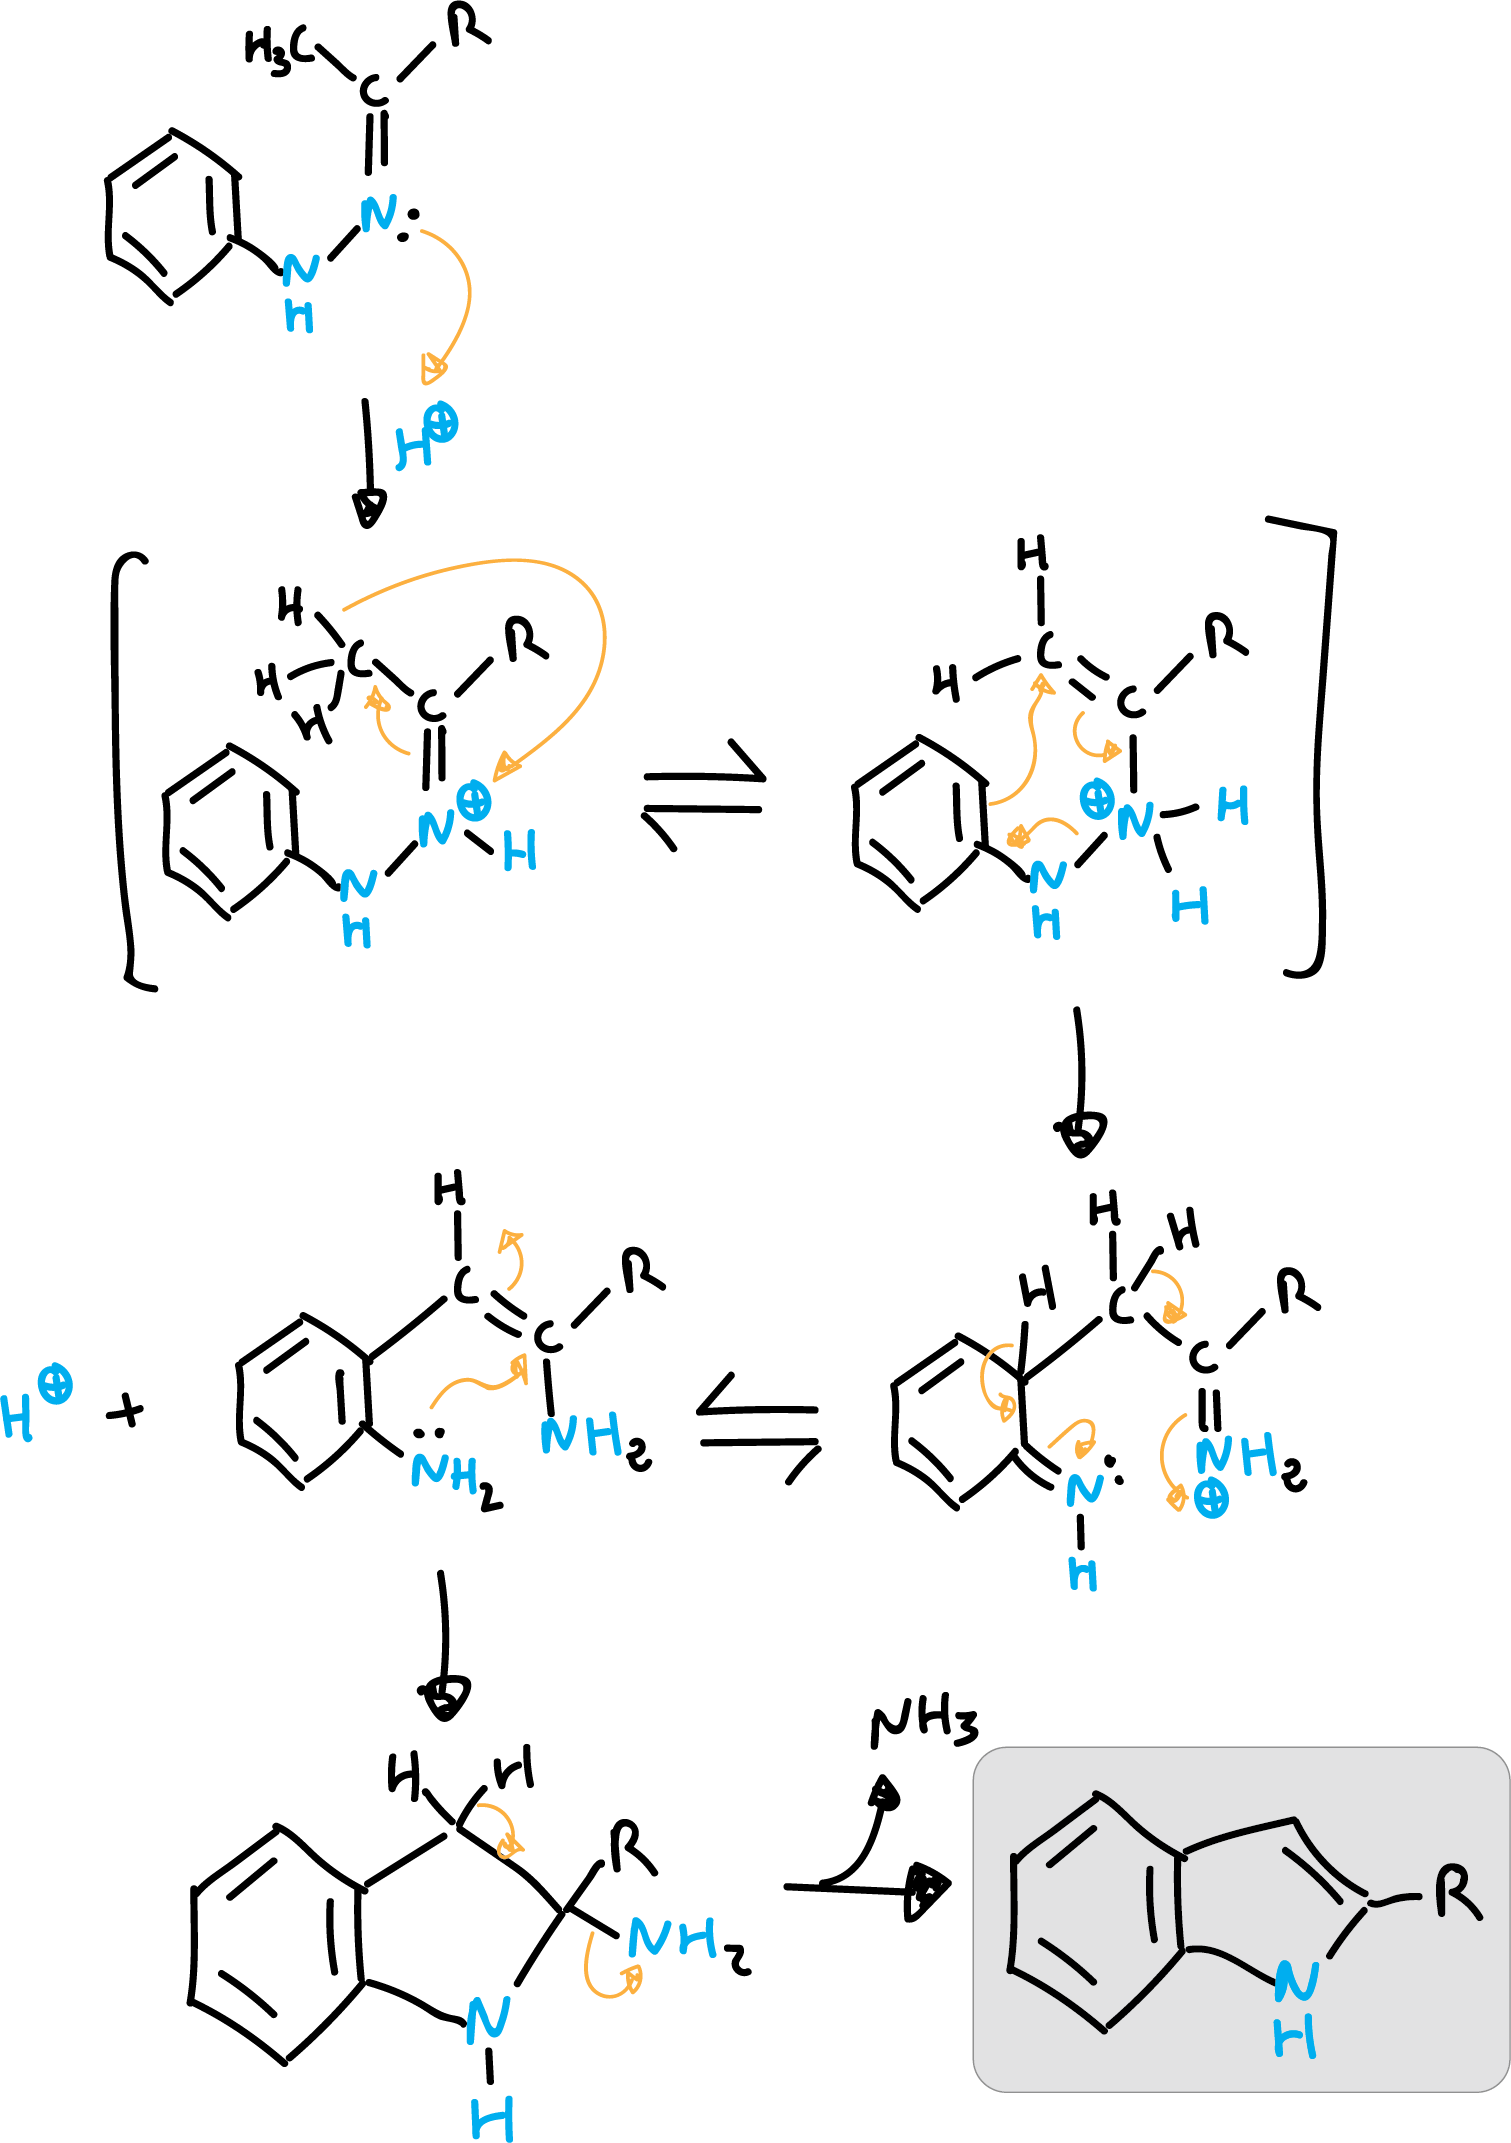 Mechanism of reaction for the Fischer indole synthesis - general reaction scheme - SIKJAQJRHWYJAI-UHFFFAOYSA-N